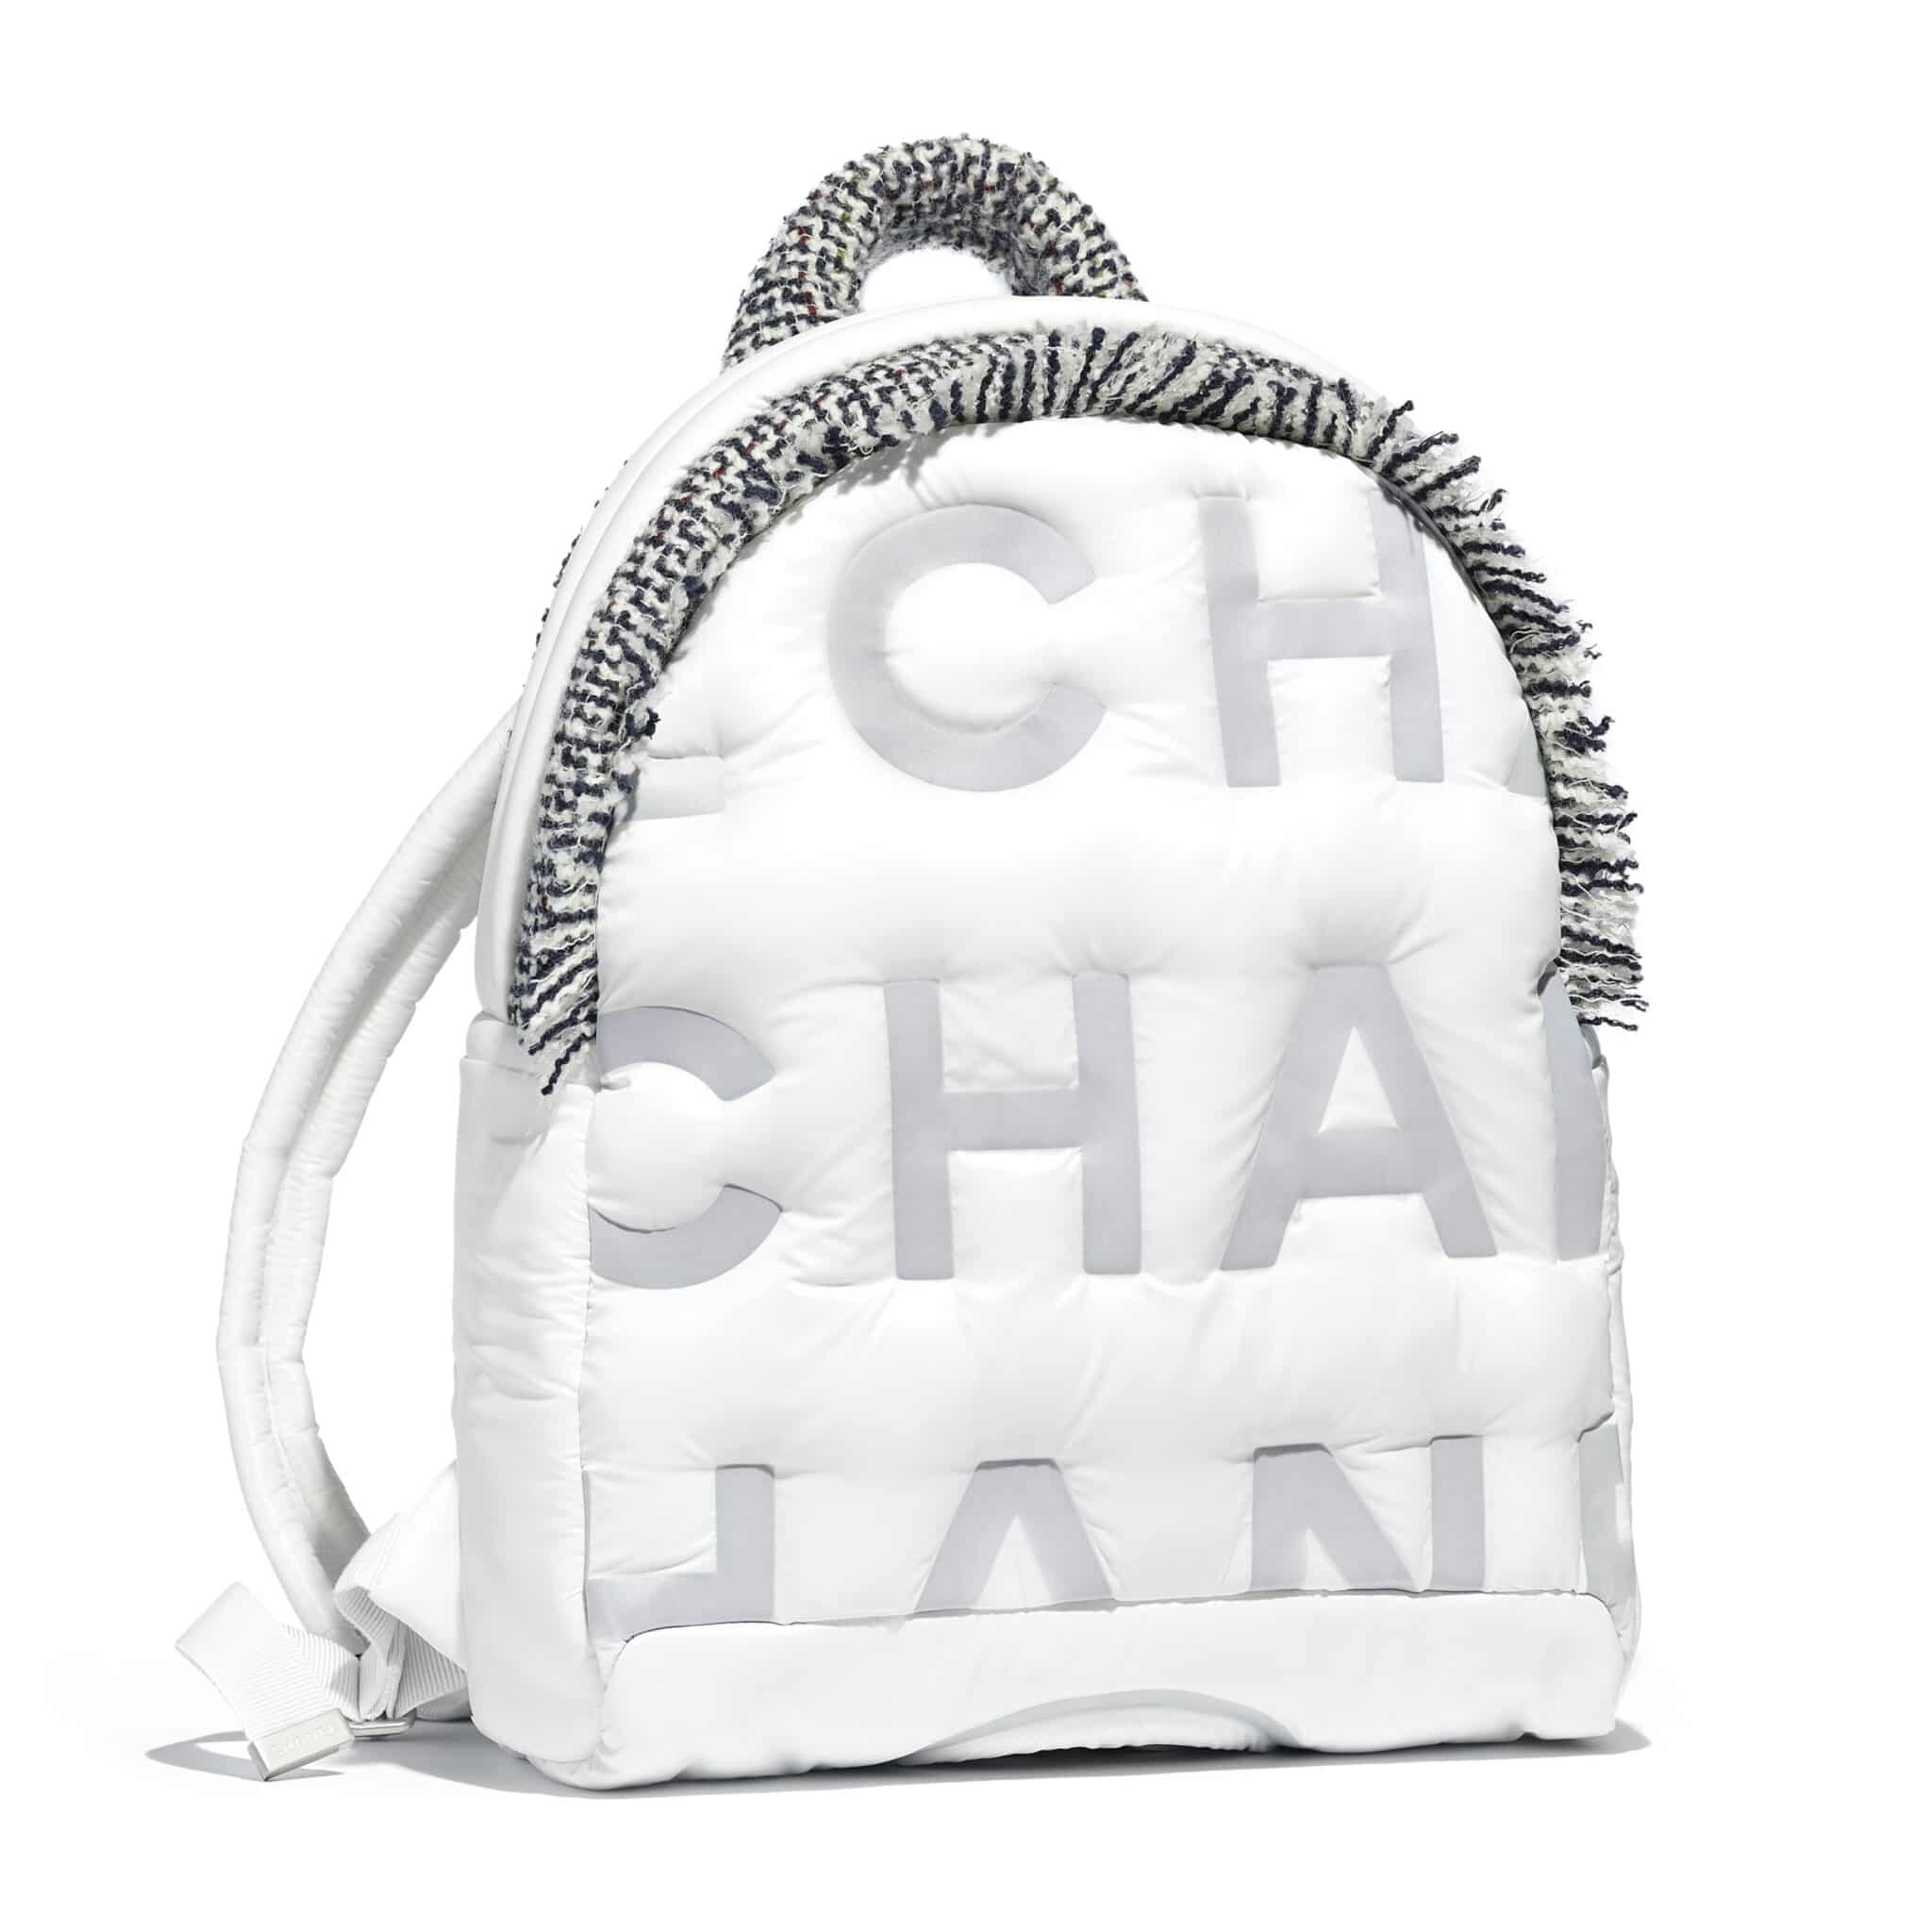 Chanel 'Backpack In Seoul' Bag Reference Guide - Spotted Fashion